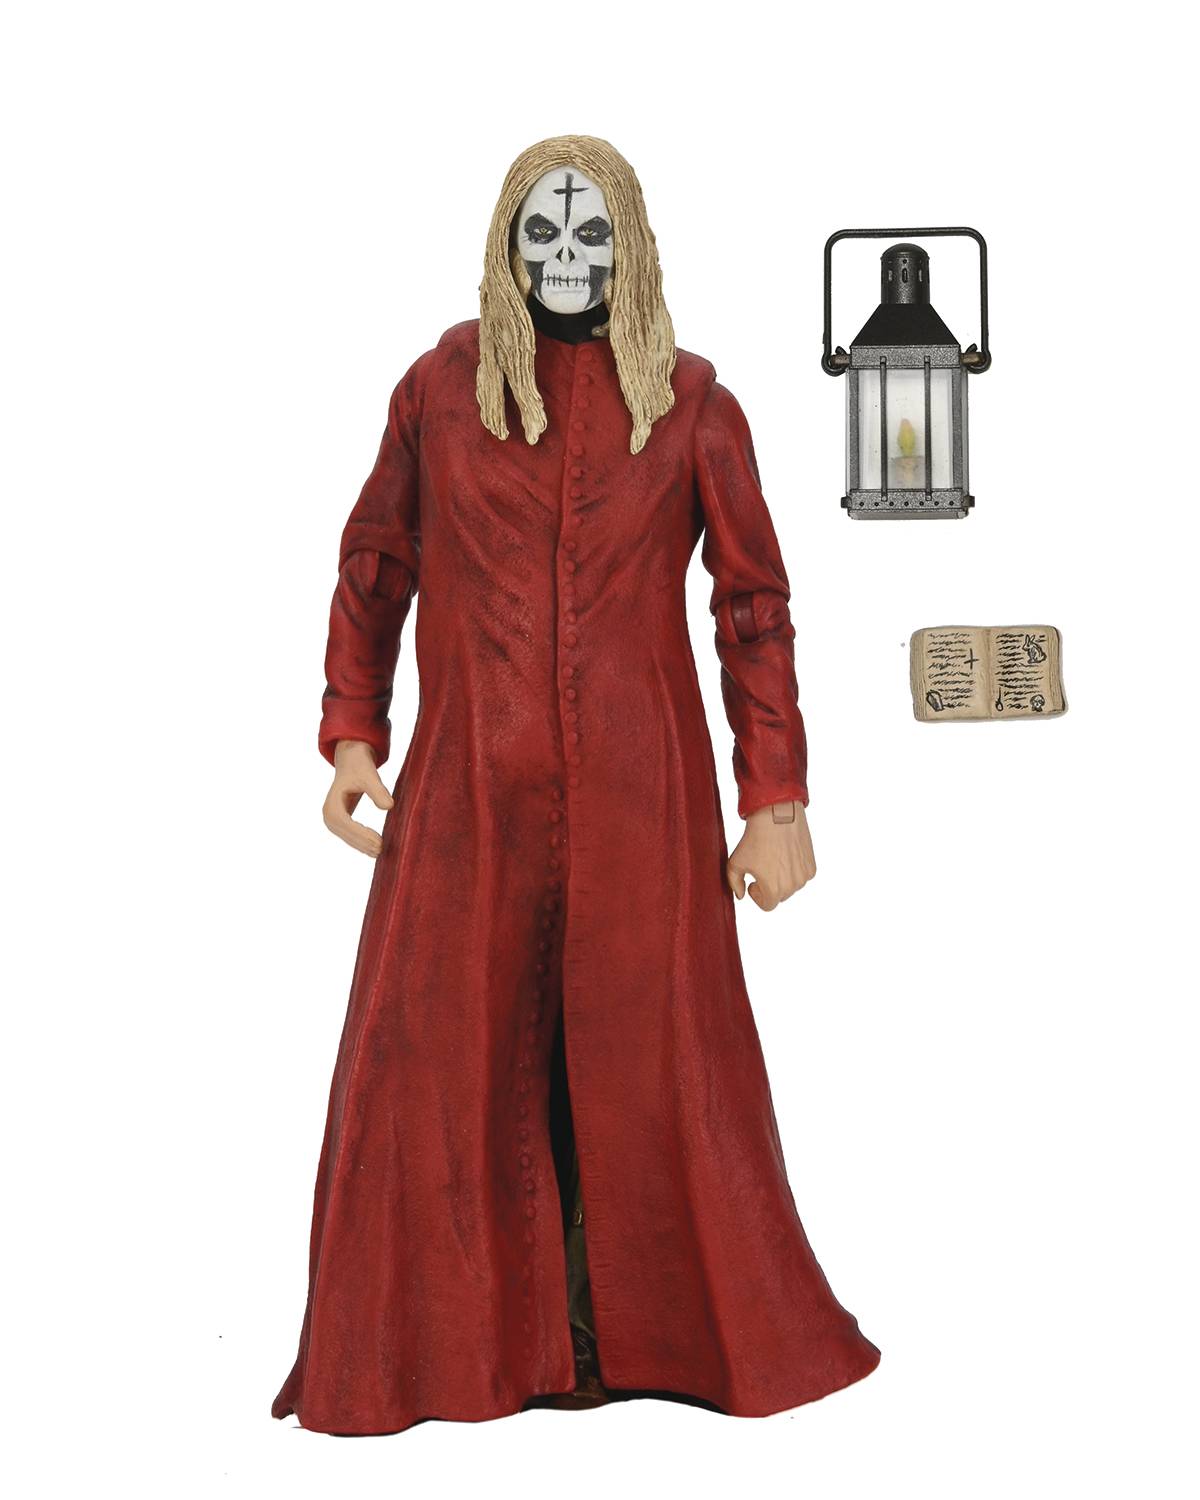 HOUSE OF 1000 CORPSES 20TH ANN OTIS RED ROBE 7IN AF  (C